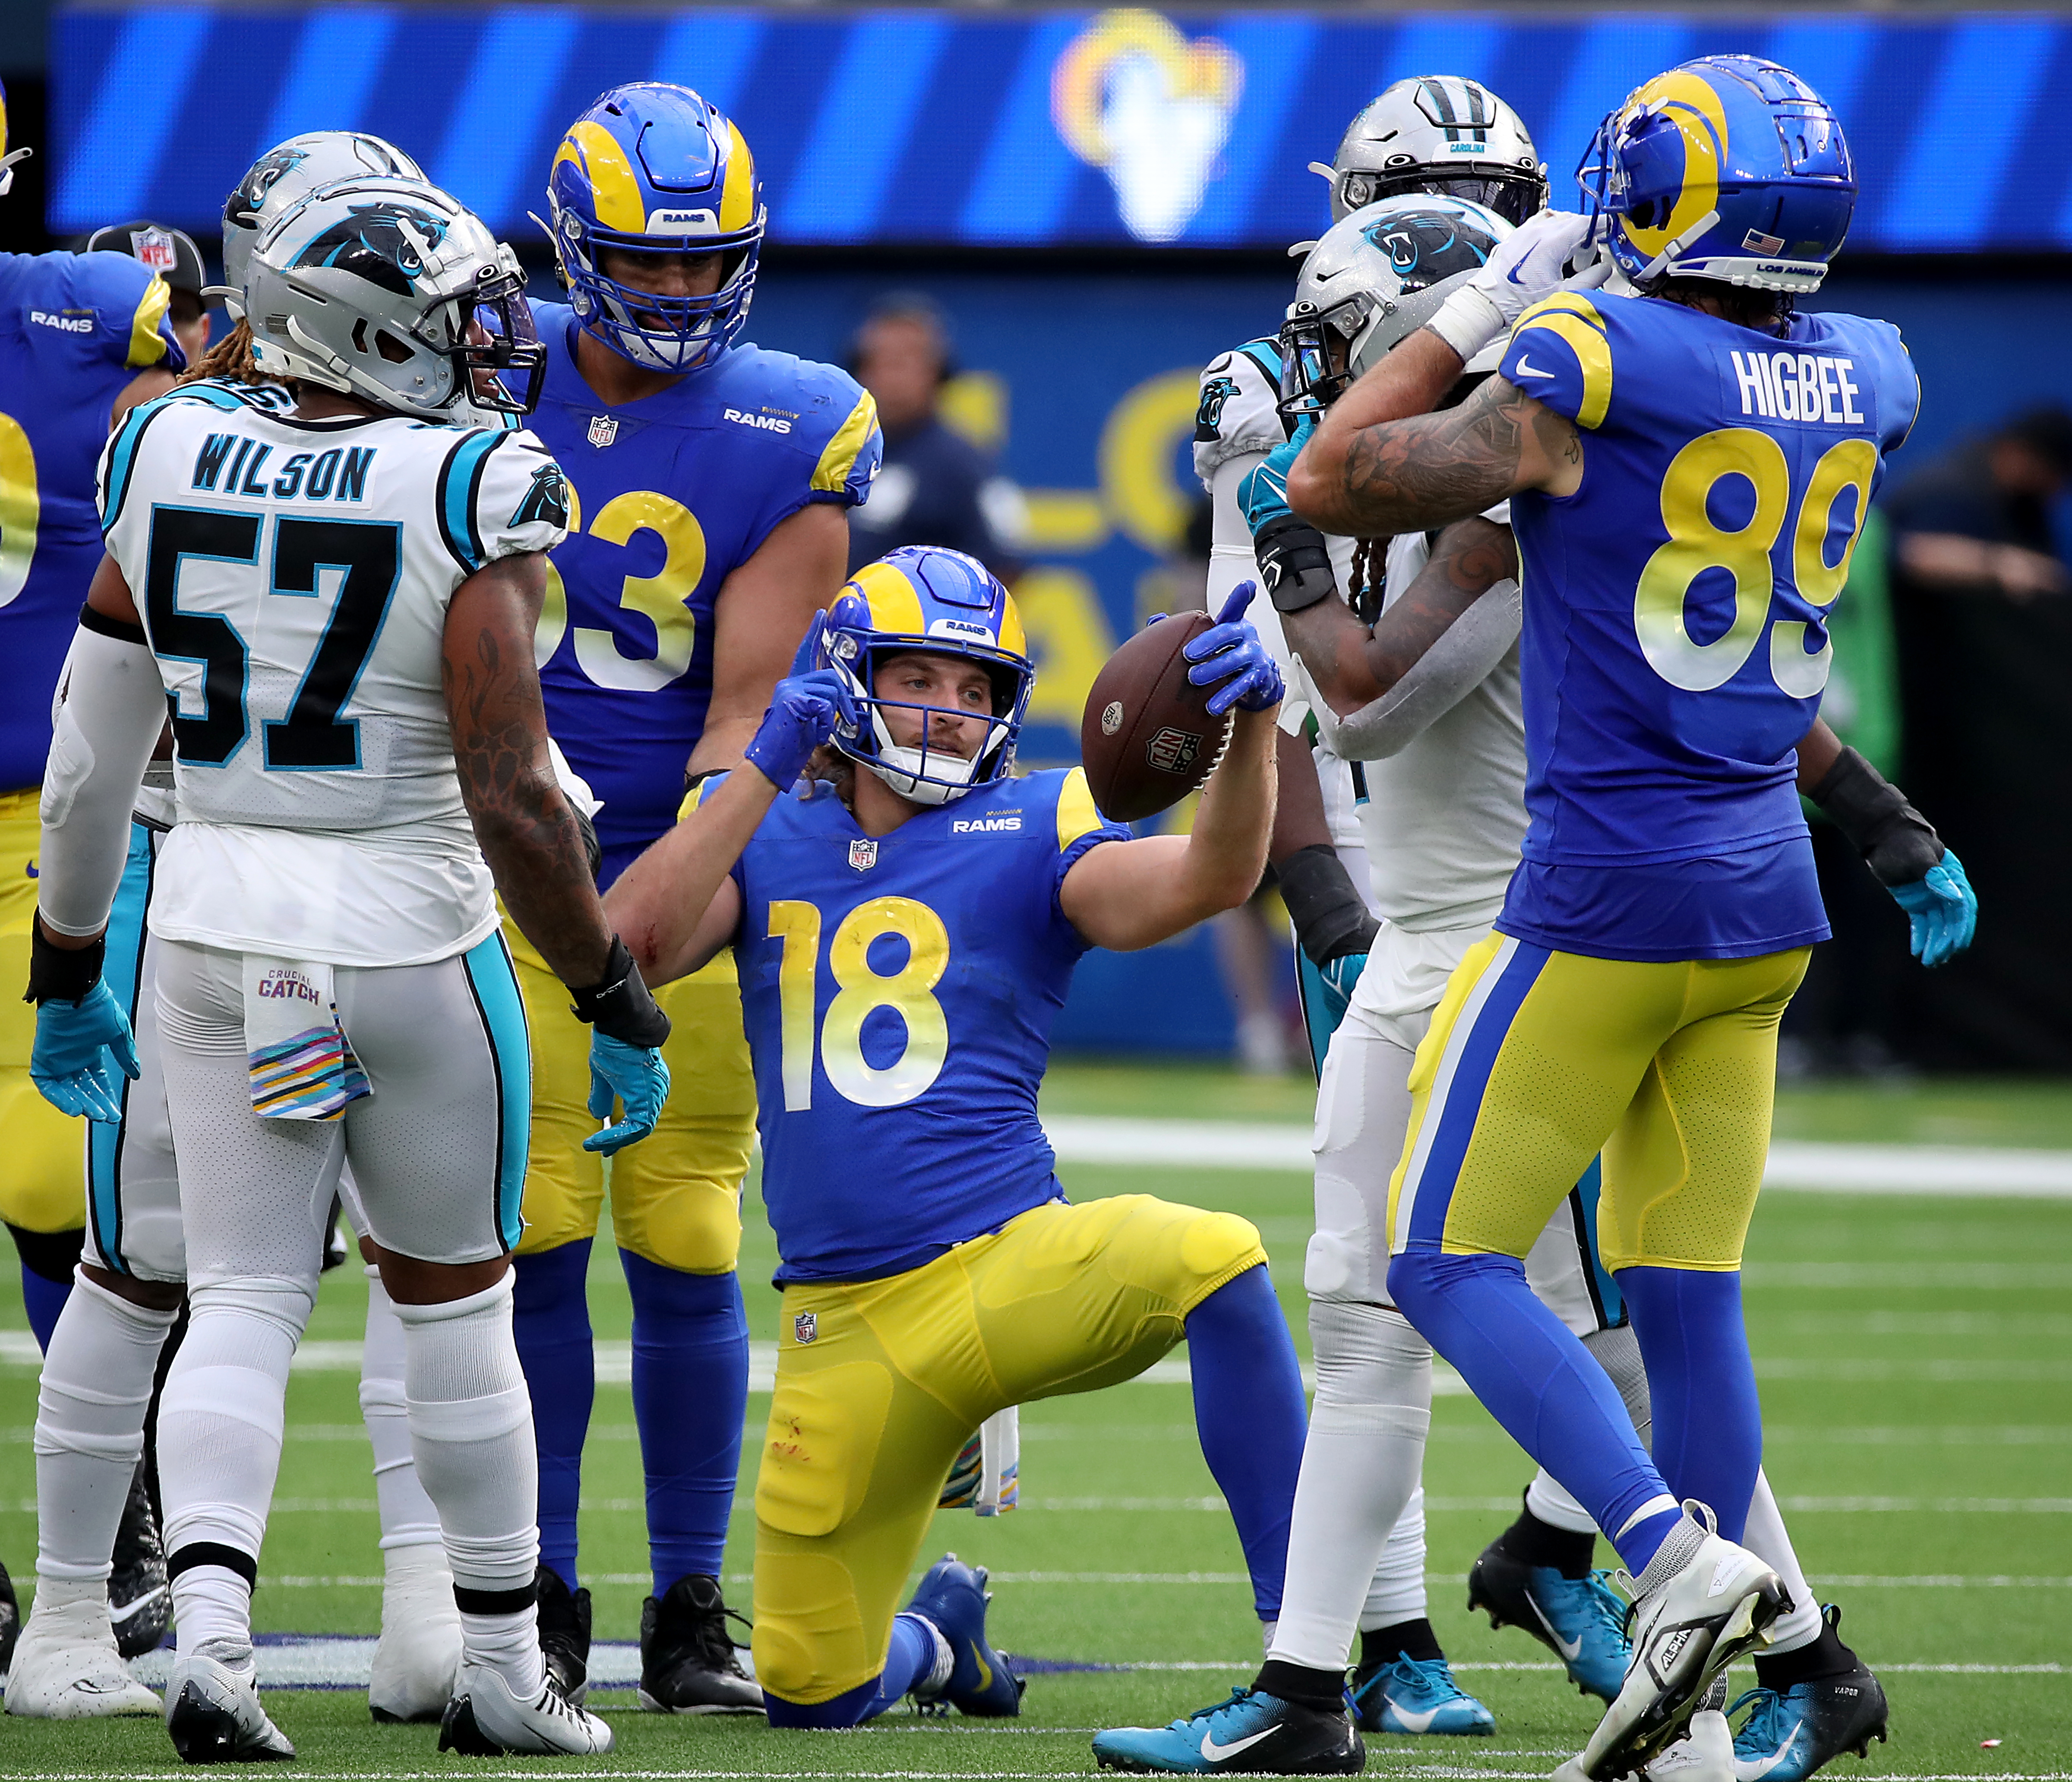 Los Angeles Rams play against the Carolina Panthers in an NFL regular season game at SoFi Stadium in Inglewood on Sunday, Oct. 16, 2022.